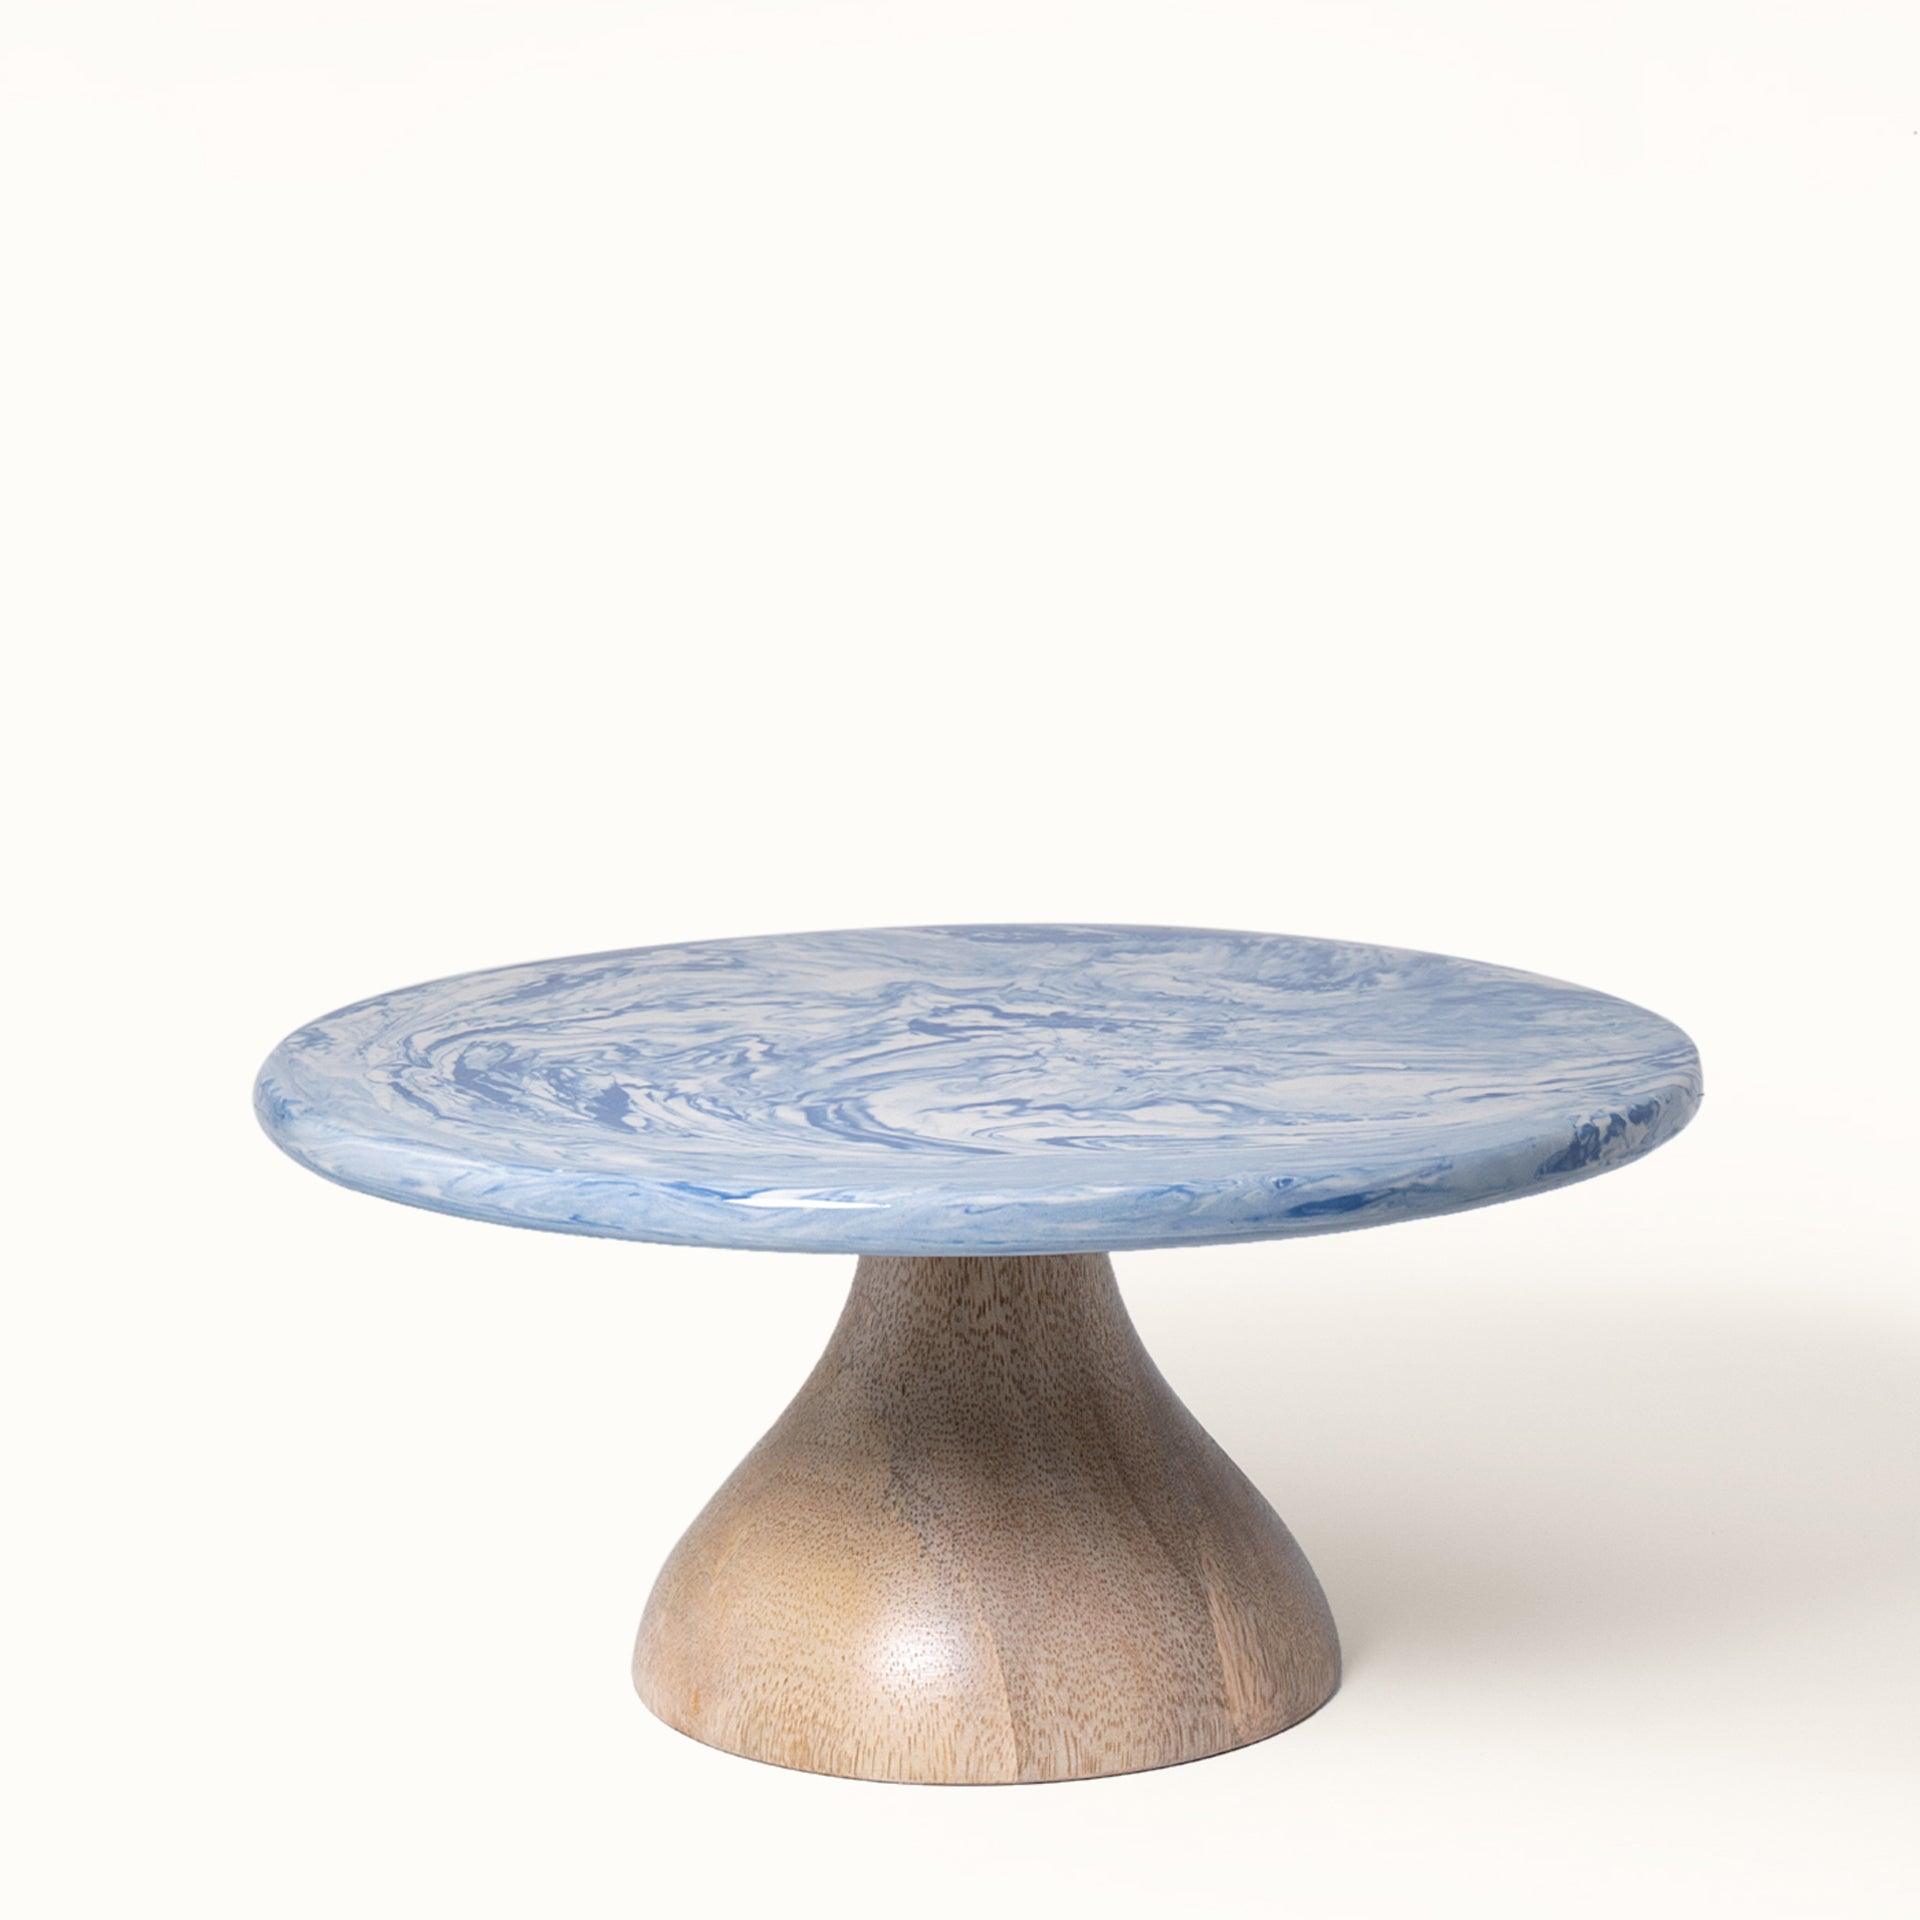 the earth ceramic cake stand